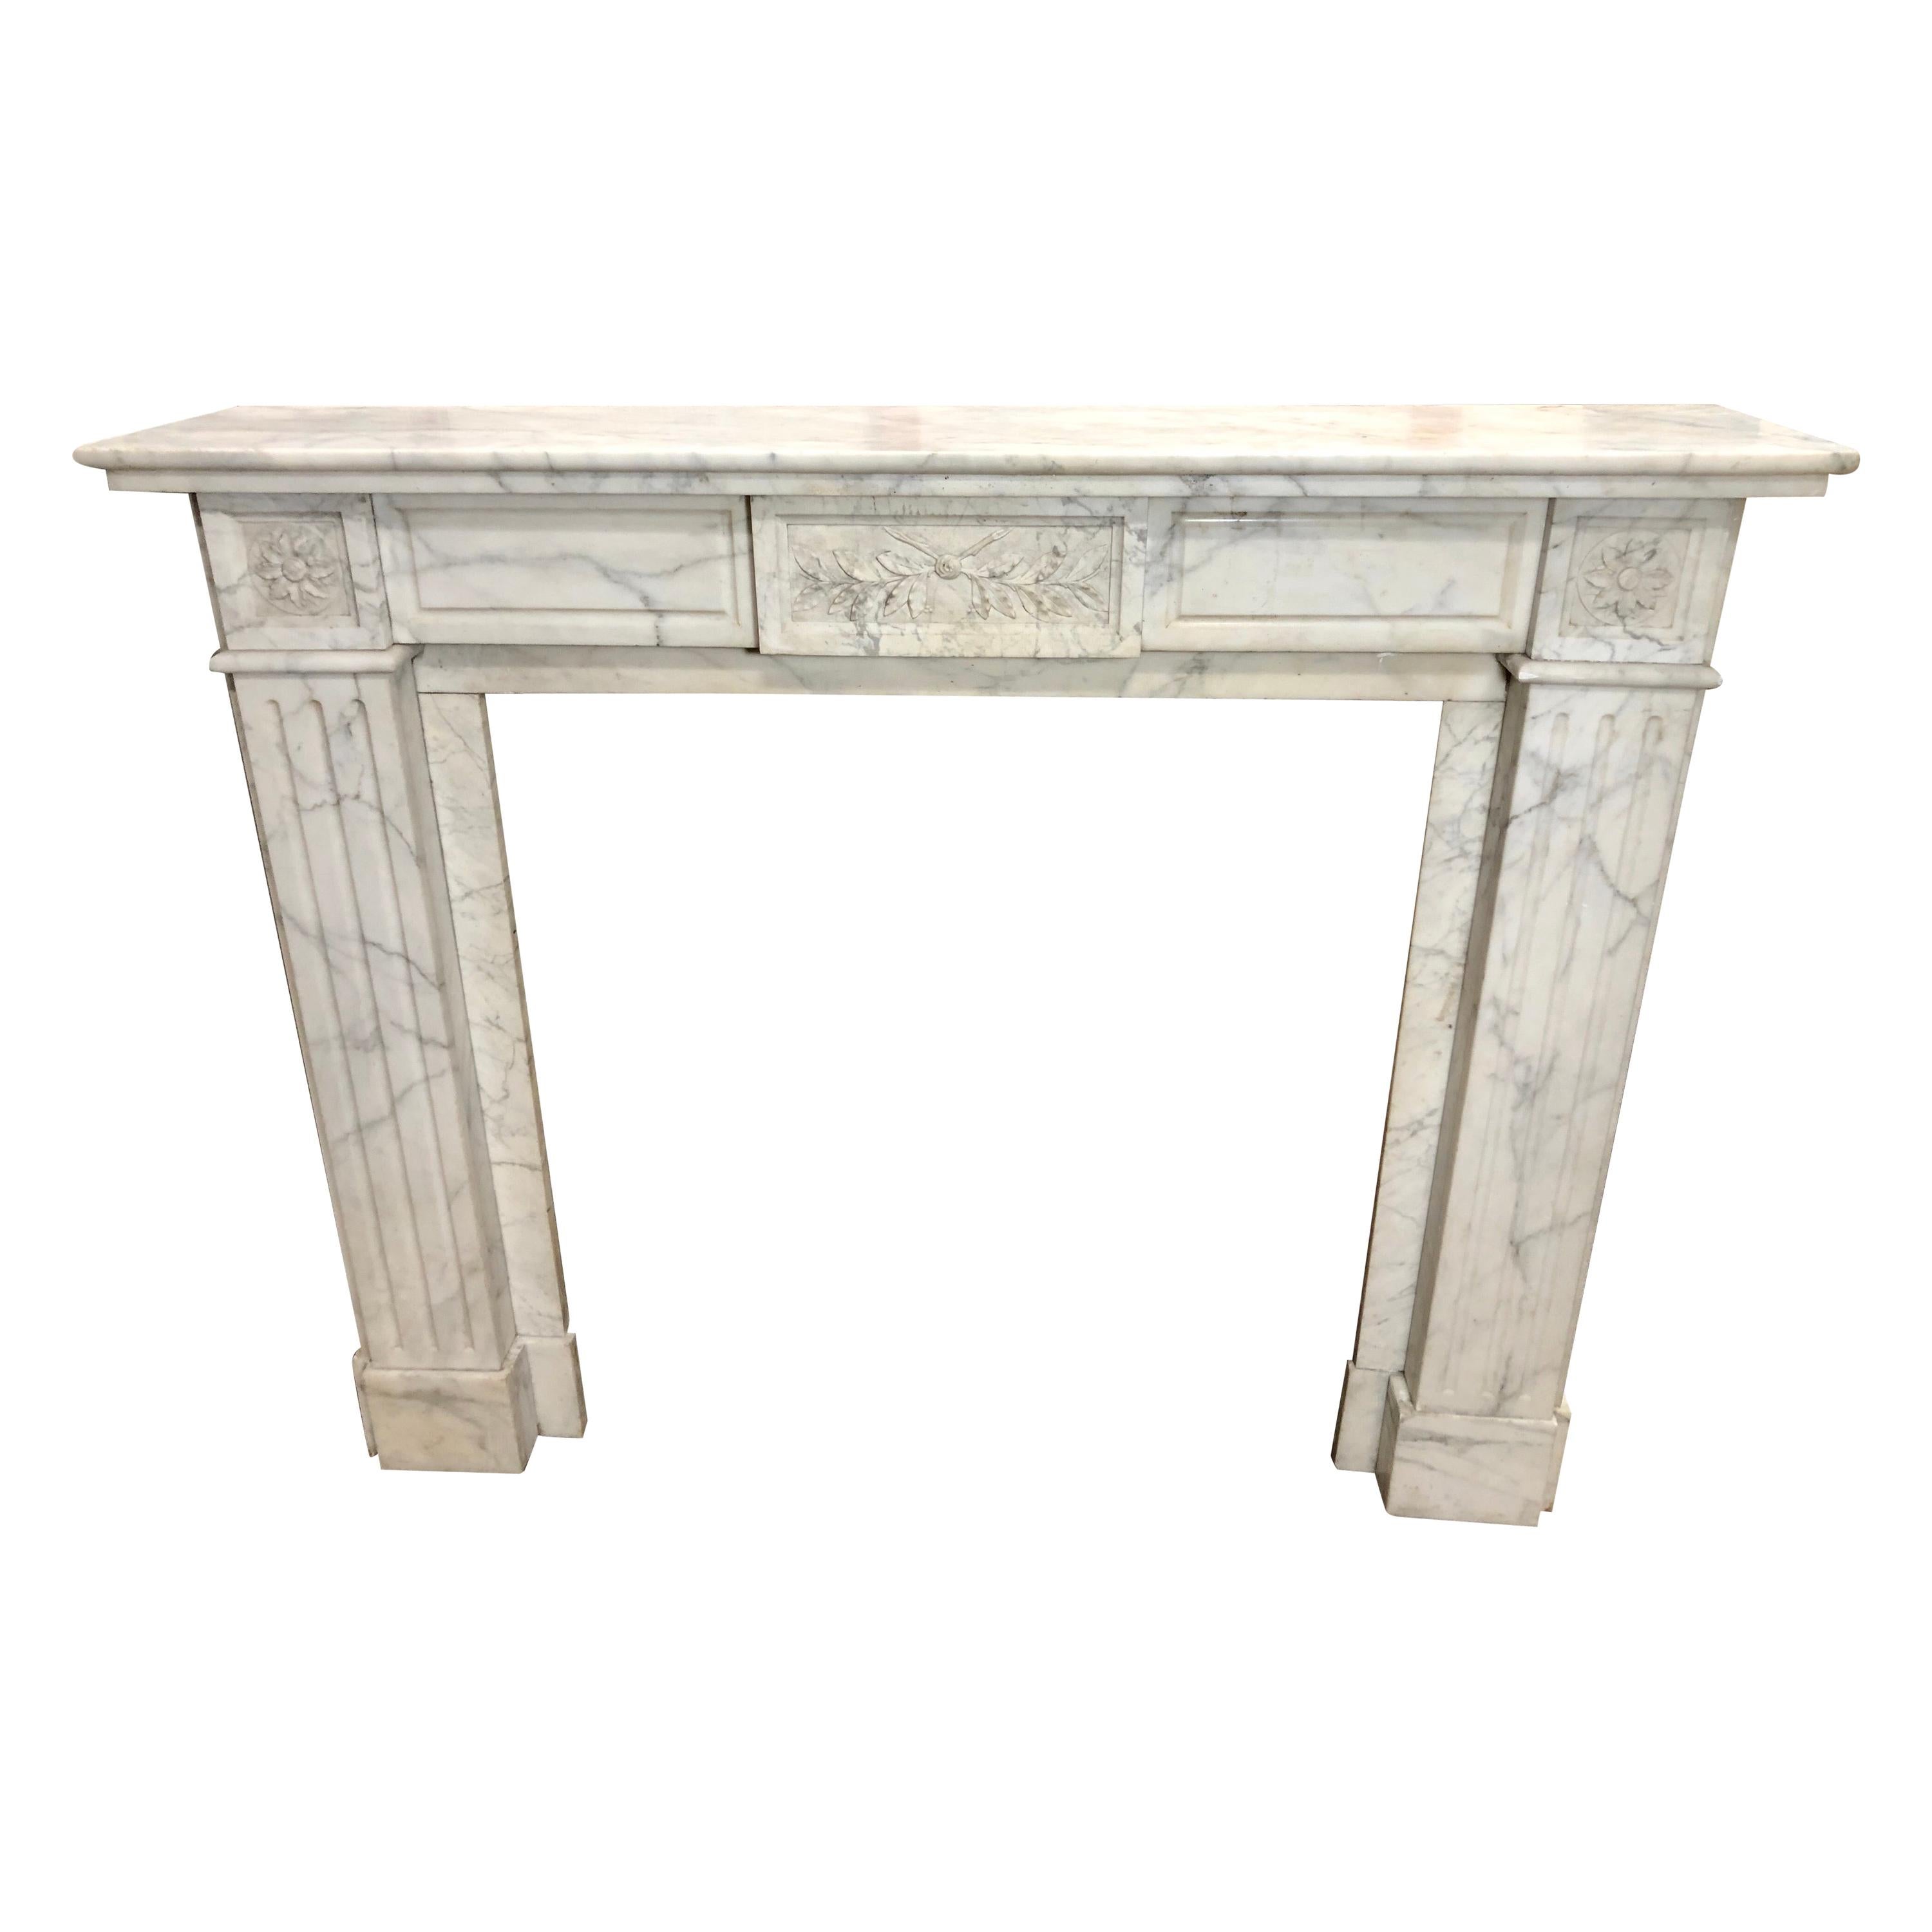 19th Century Marble Fireplace from France